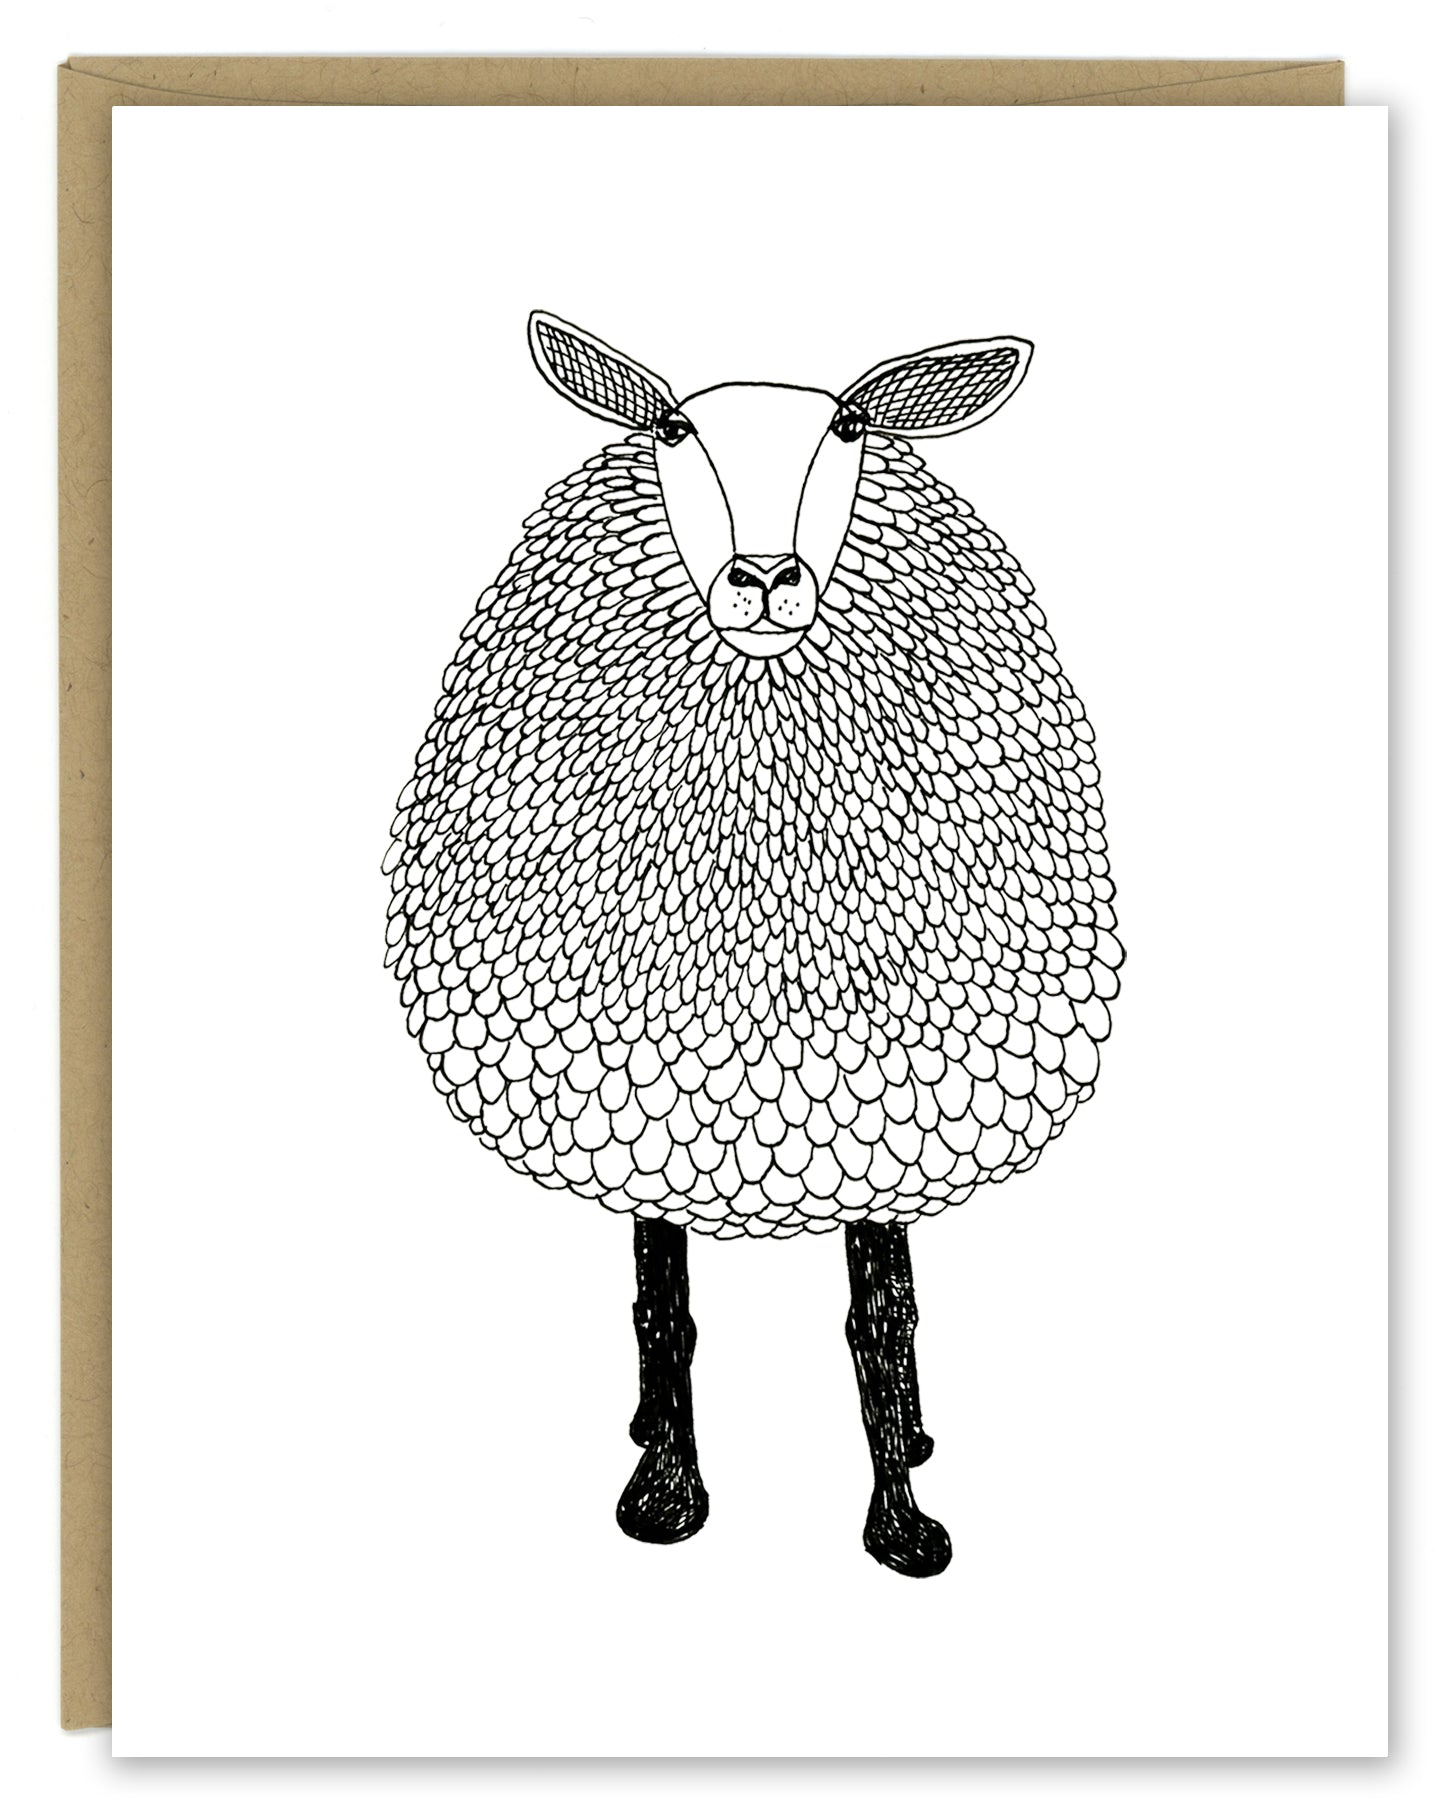 A greeting card with a hand-drawn black and white ink illustration of a sheep. Shown with a Kraft paper envelope on a white background. 